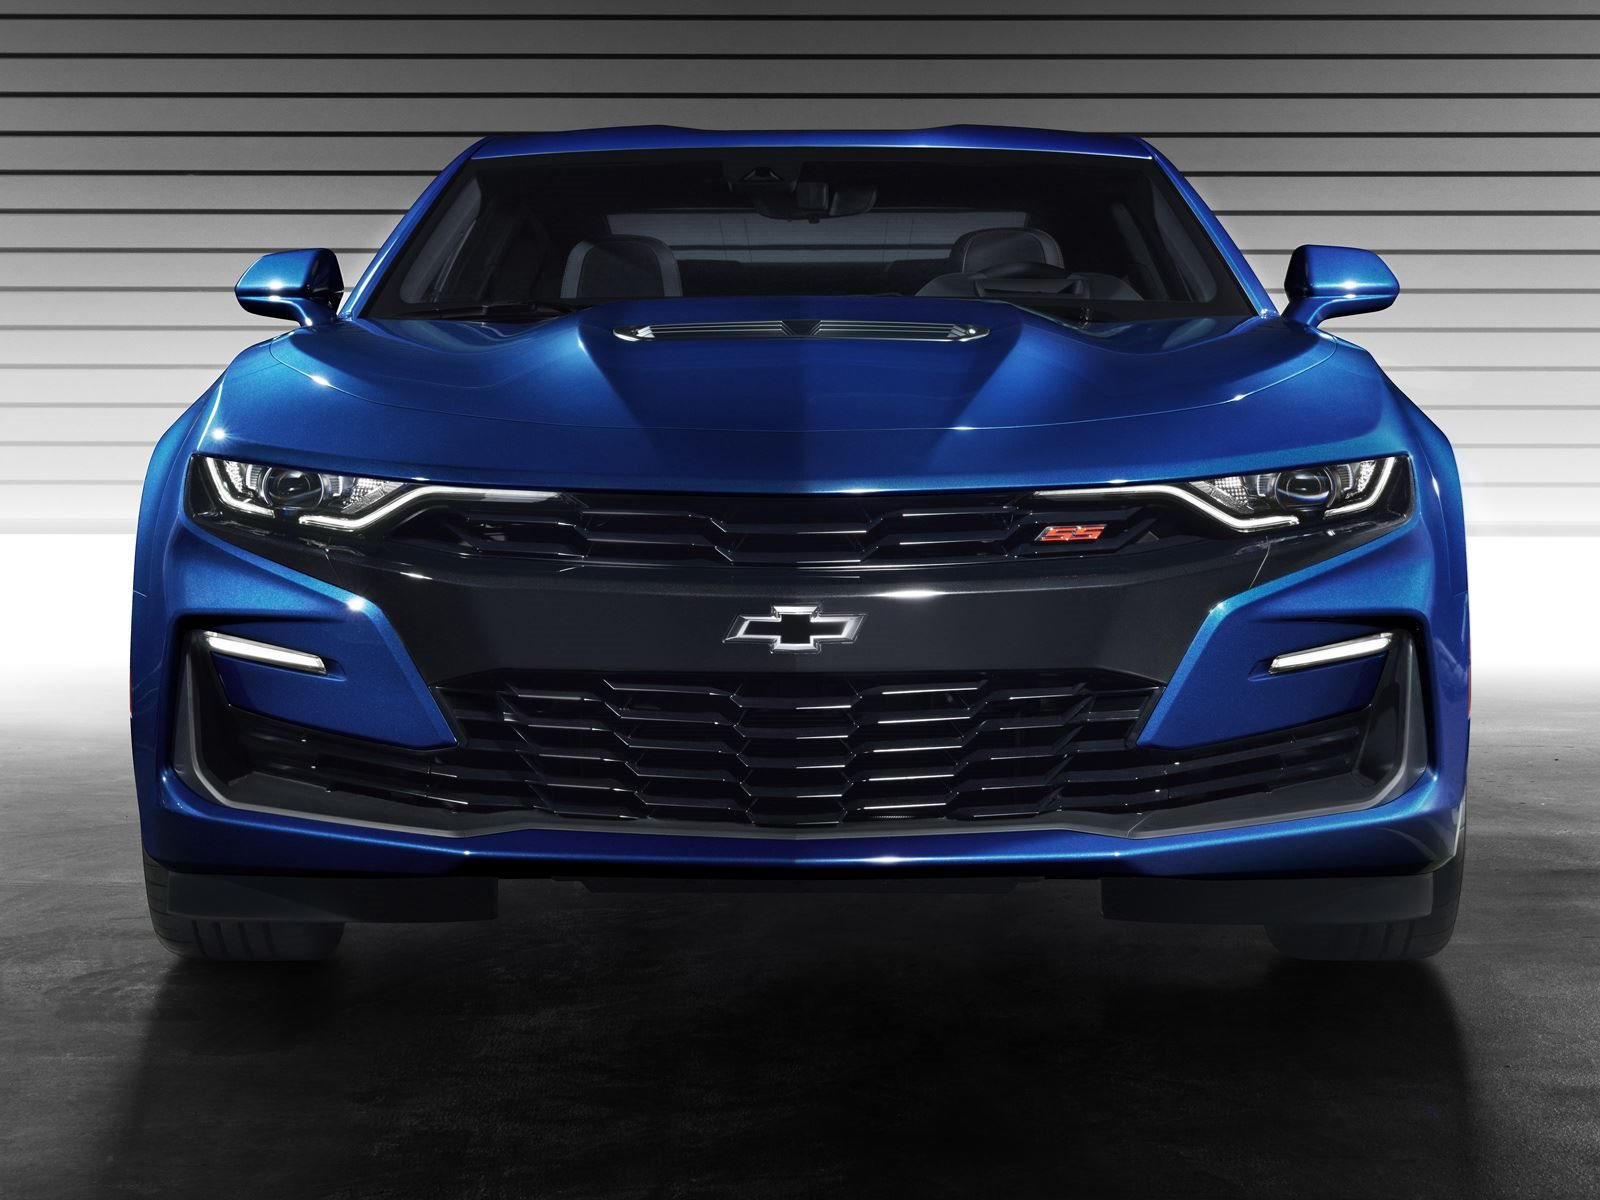 2019 Chevrolet Camaro Pricing Confirmed, Starts From $26,495 ...